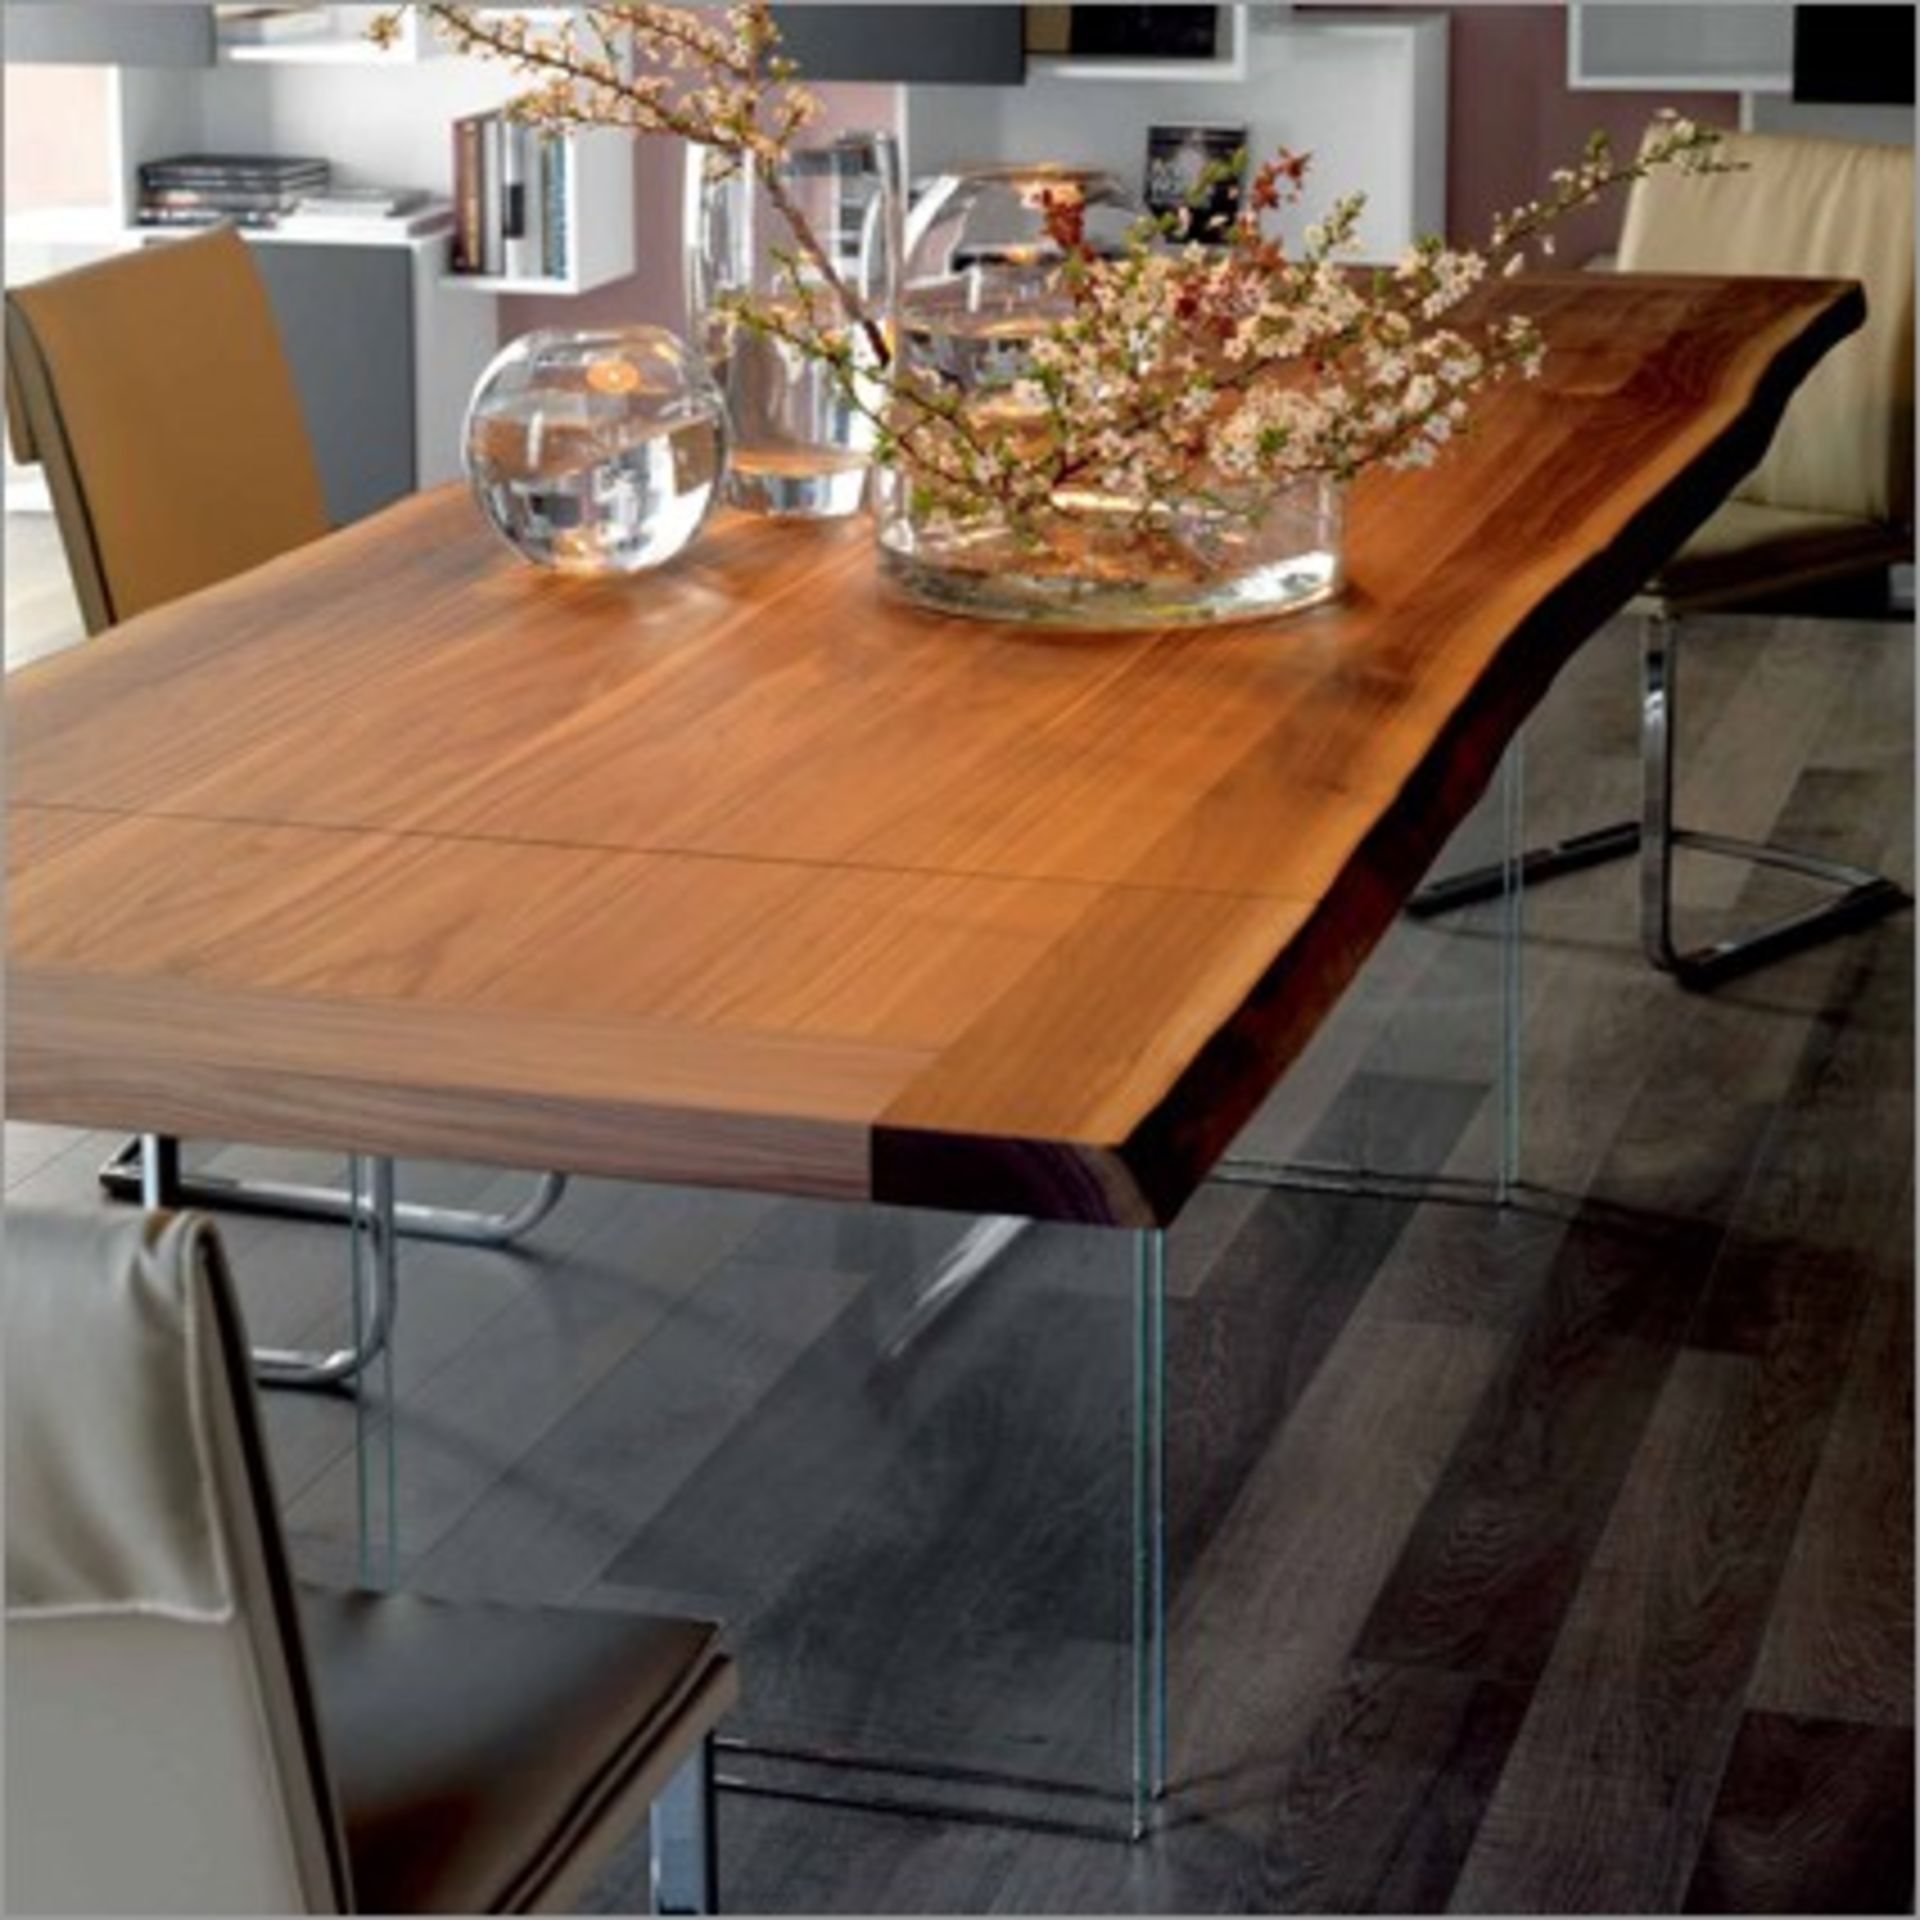 1 x Cattelan Ikon Drive Table Top - Base Not Included - 240x120cm - Ref: 3511316 - CL087 - Location: - Image 21 of 27